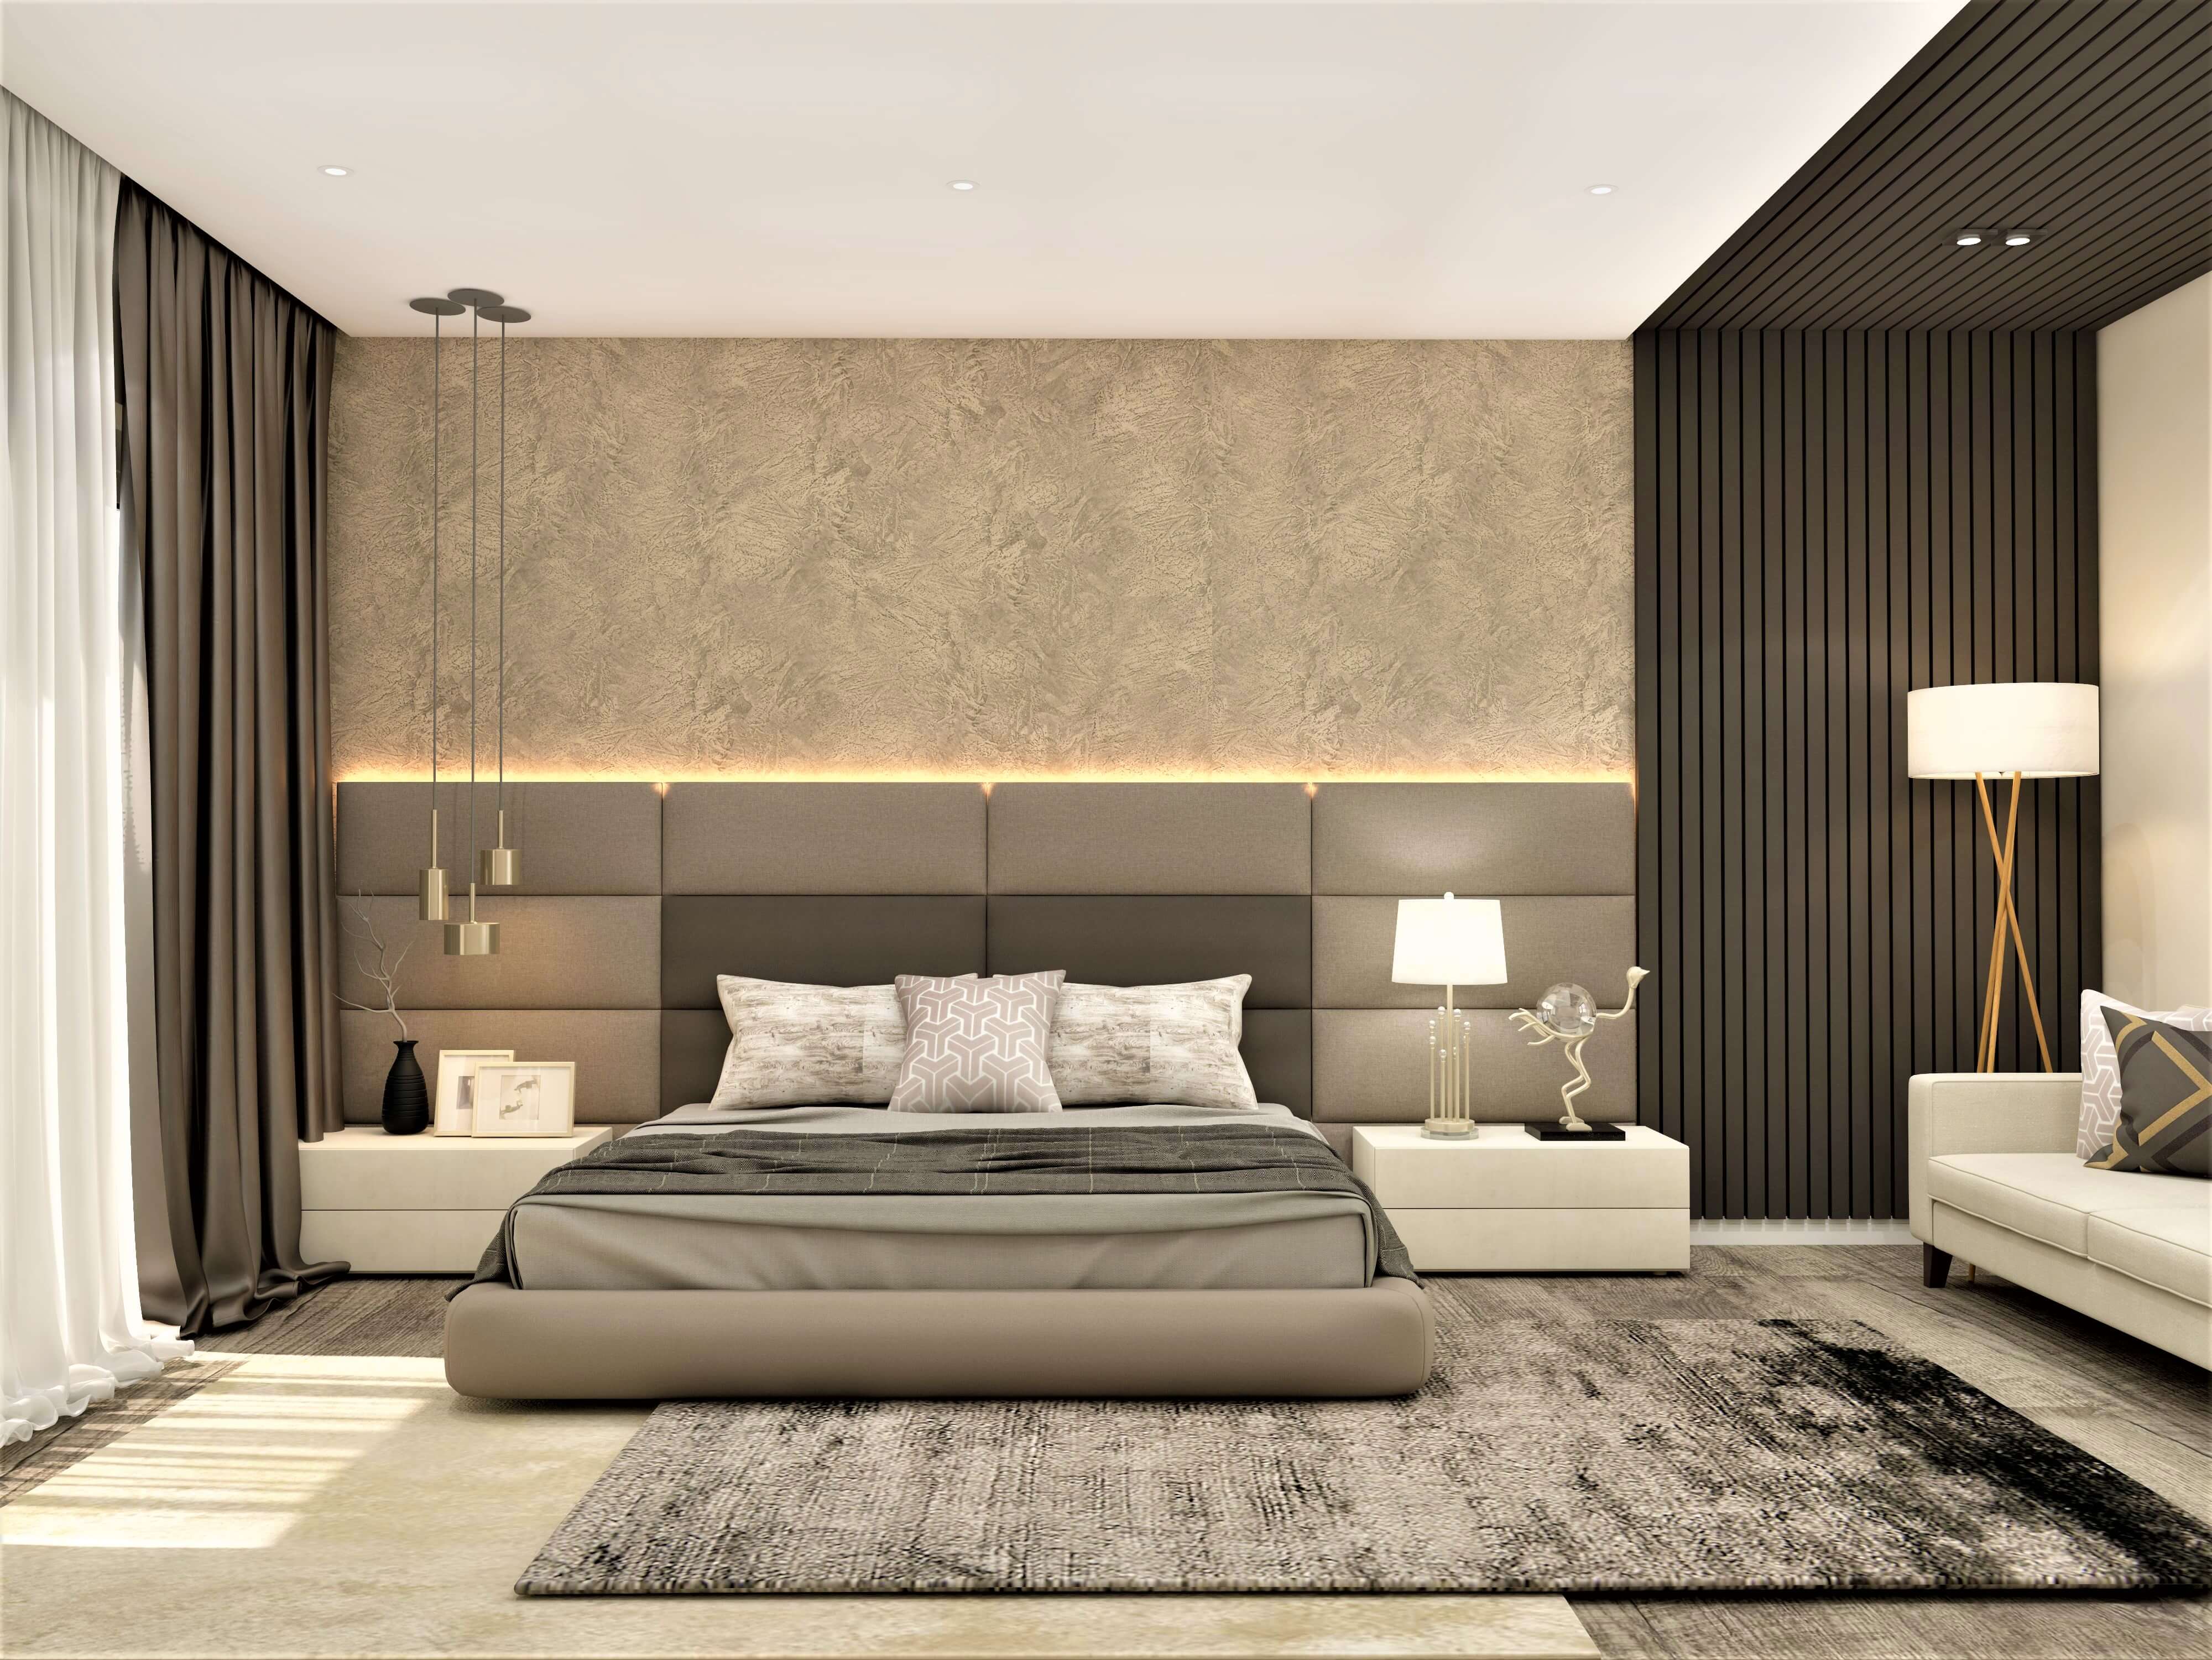 Master bedroom design with fluted panelling and pendant lights - Beautiful Homes